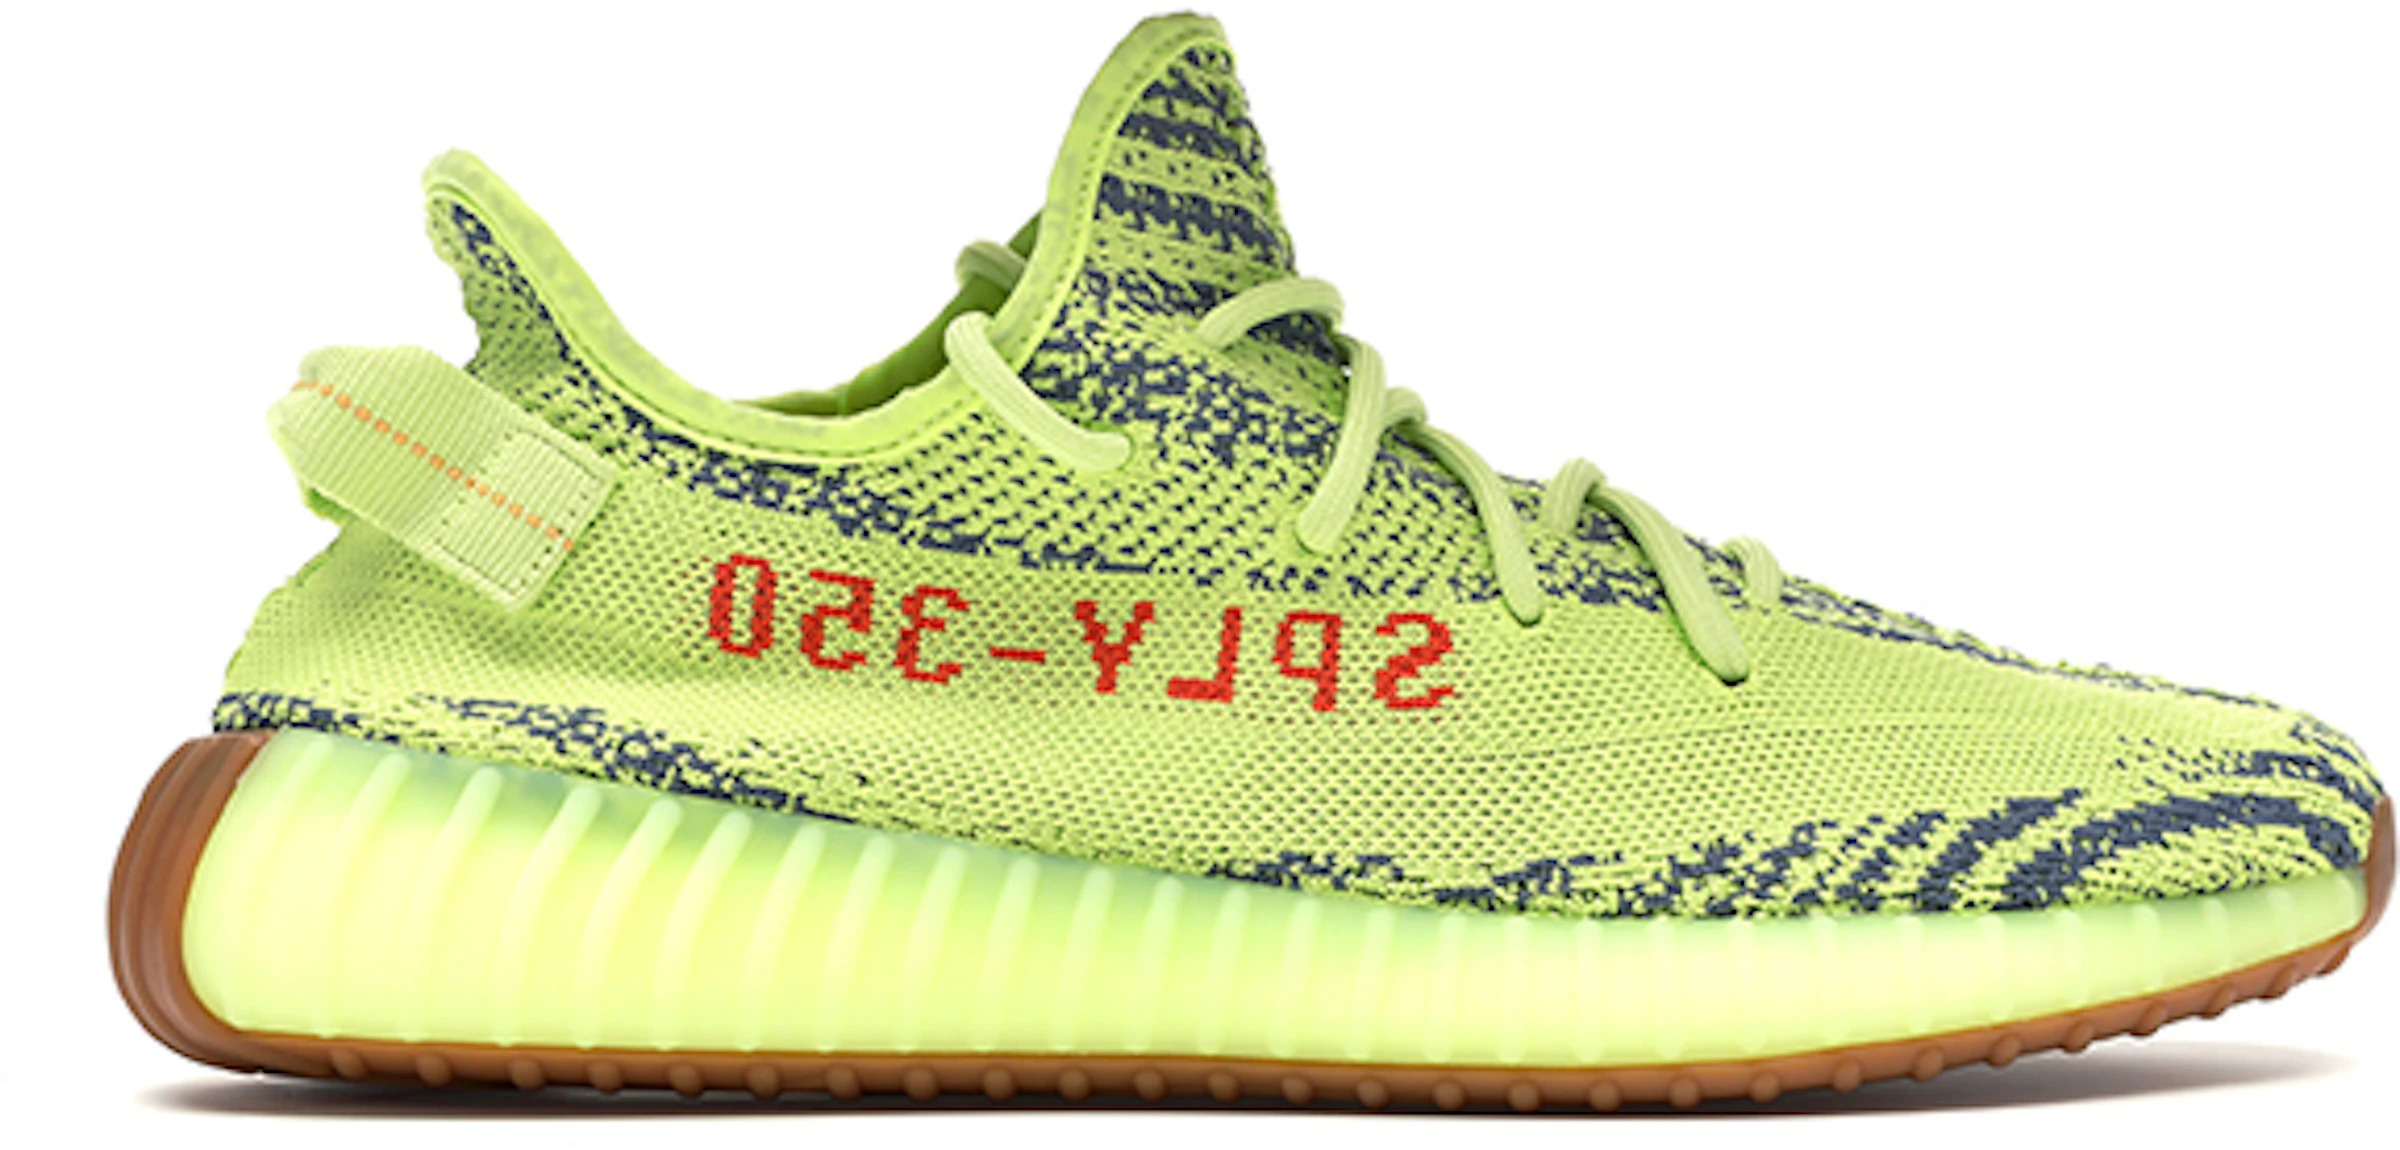 Adidas YEEZY BOOST 350 V2 Earth Detailed Look Hypebeast | vlr.eng.br